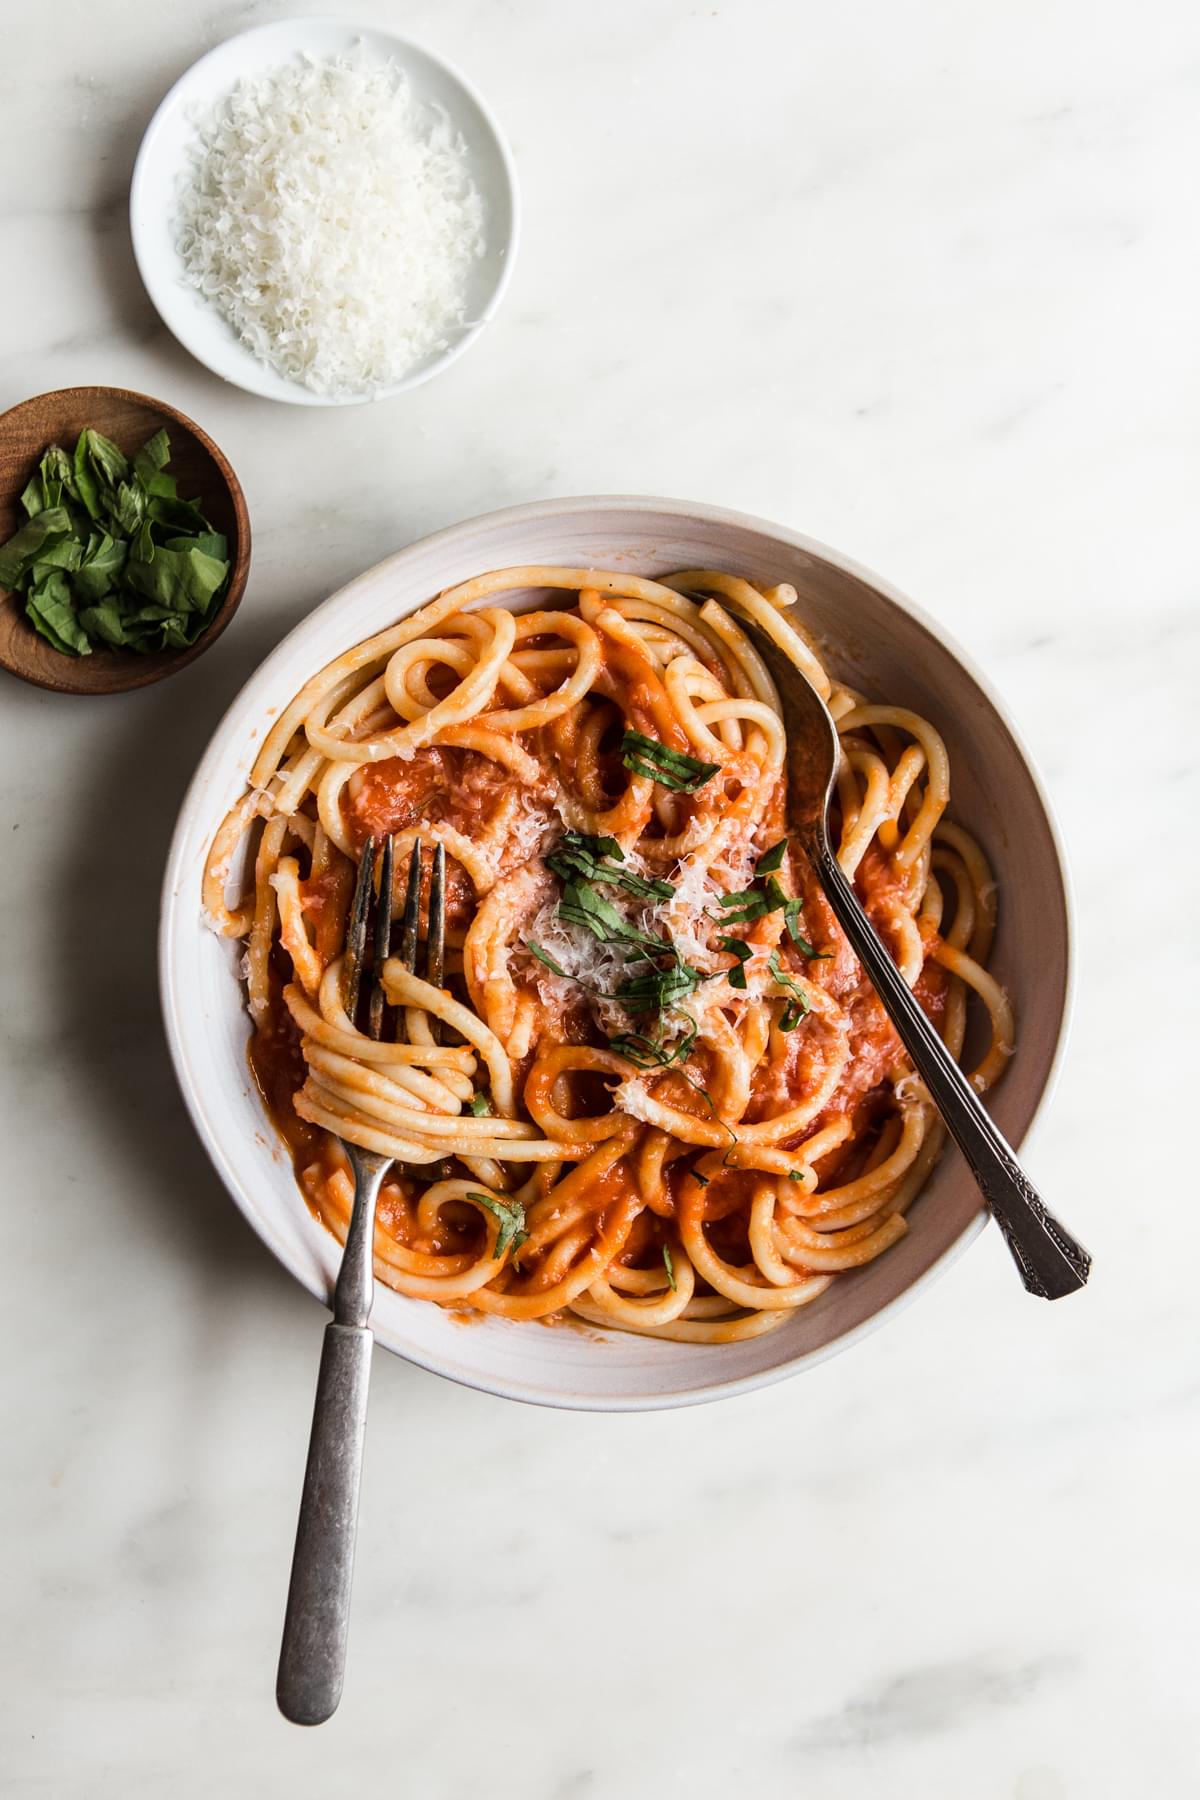 Three Ingredient pomodoro sauce with noodles in a bowl with fresh basil and parmesan cheese and two forks swirled in pasta